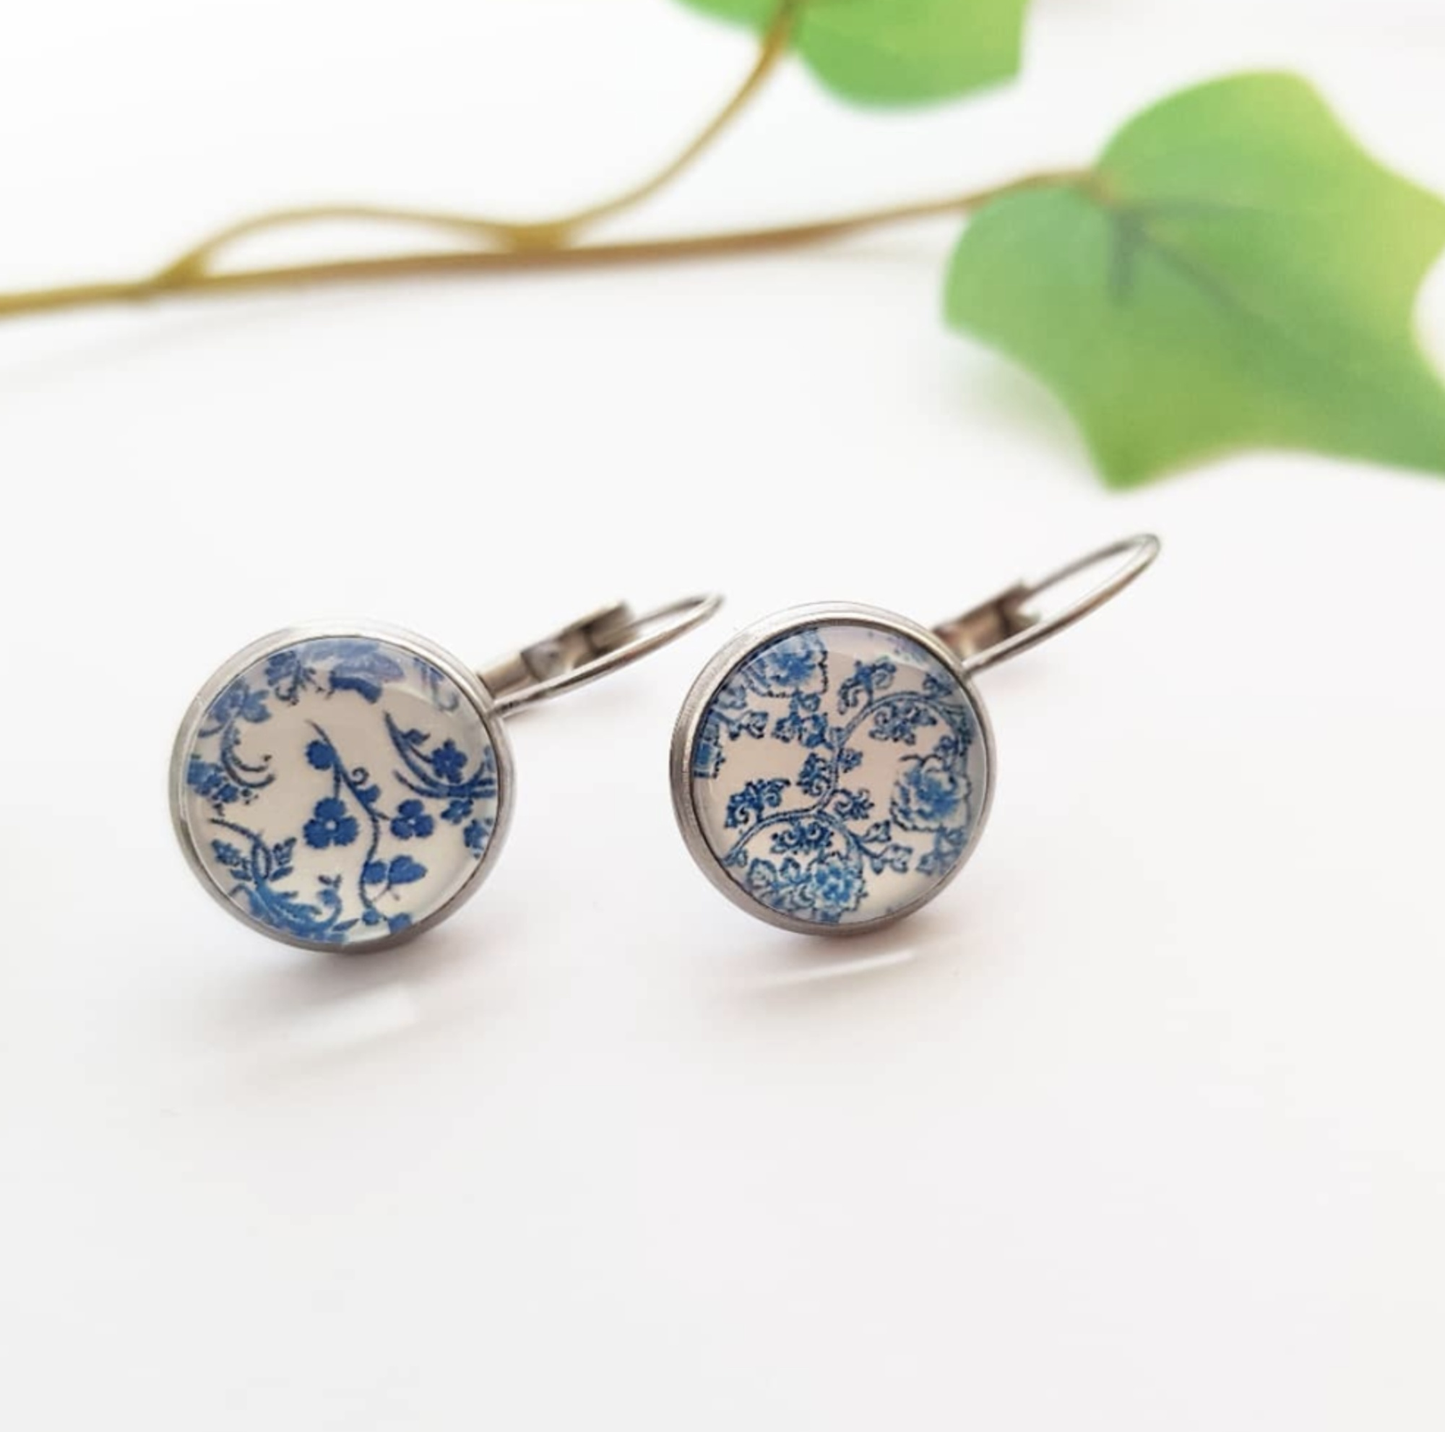 Blue Floral Cabochon earrings - Romantic and Shabby jewelry for woman